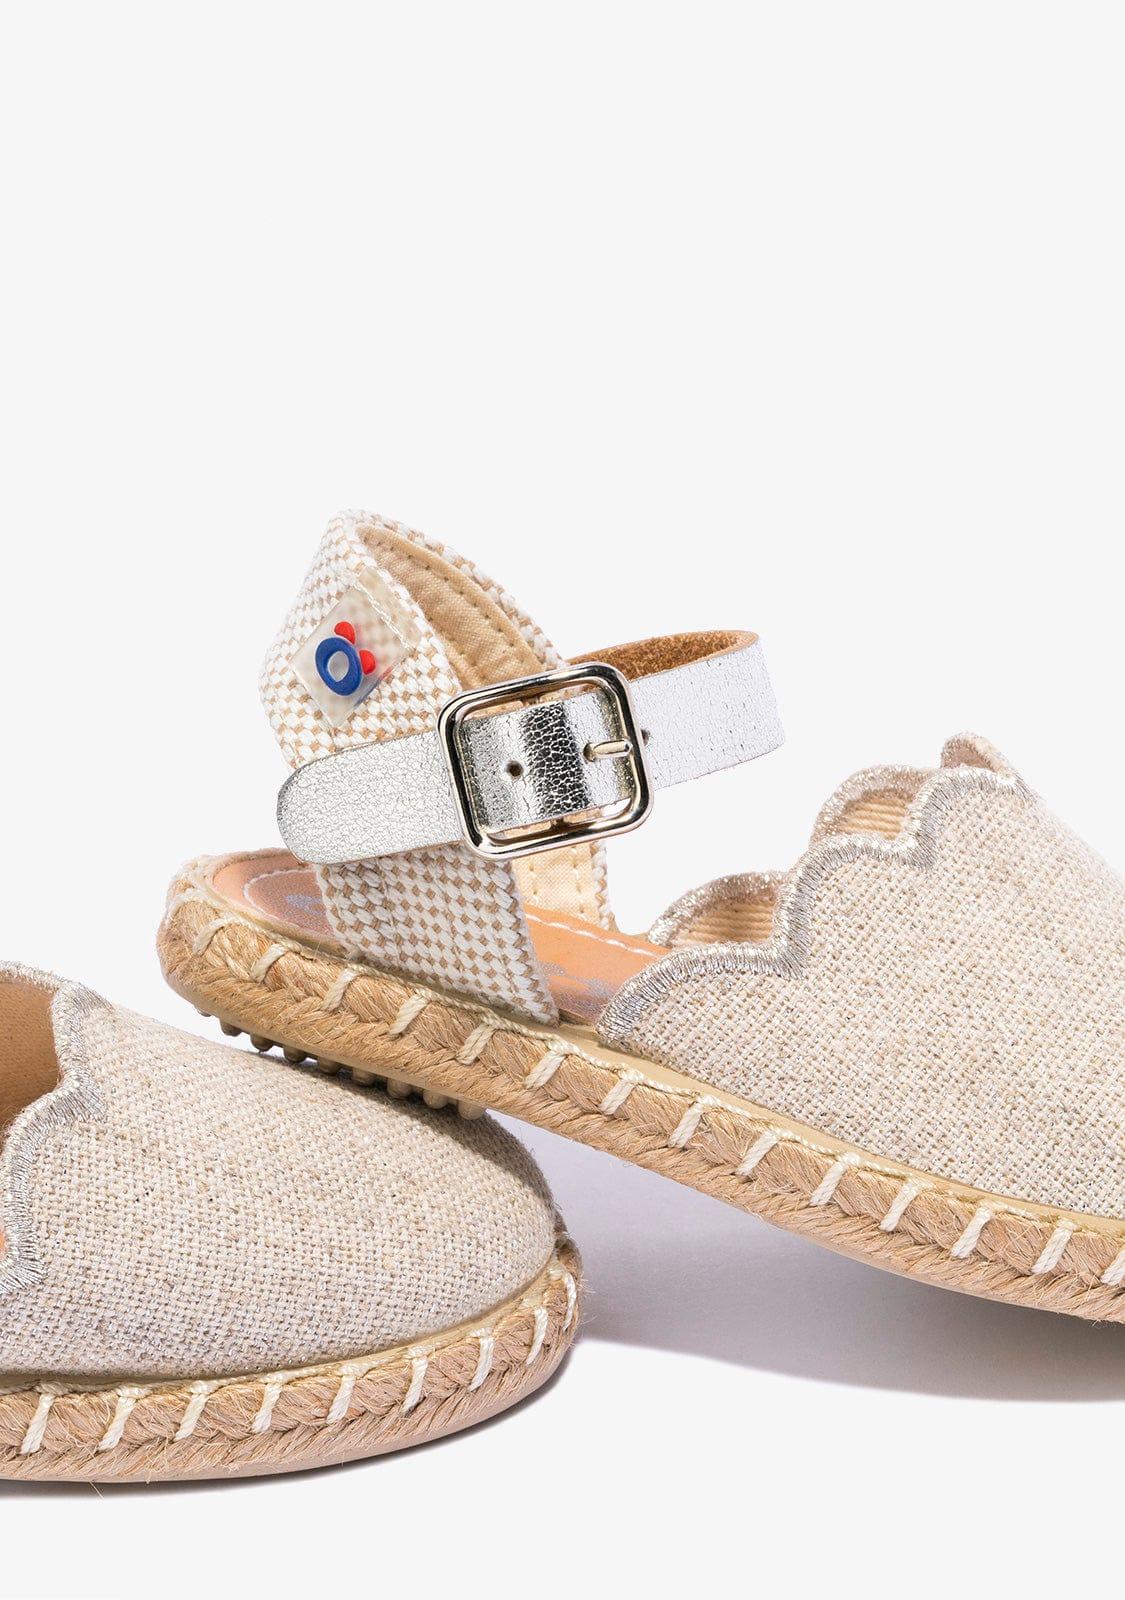 OSITO Shoes Baby's Silver Metallized Espadrilles